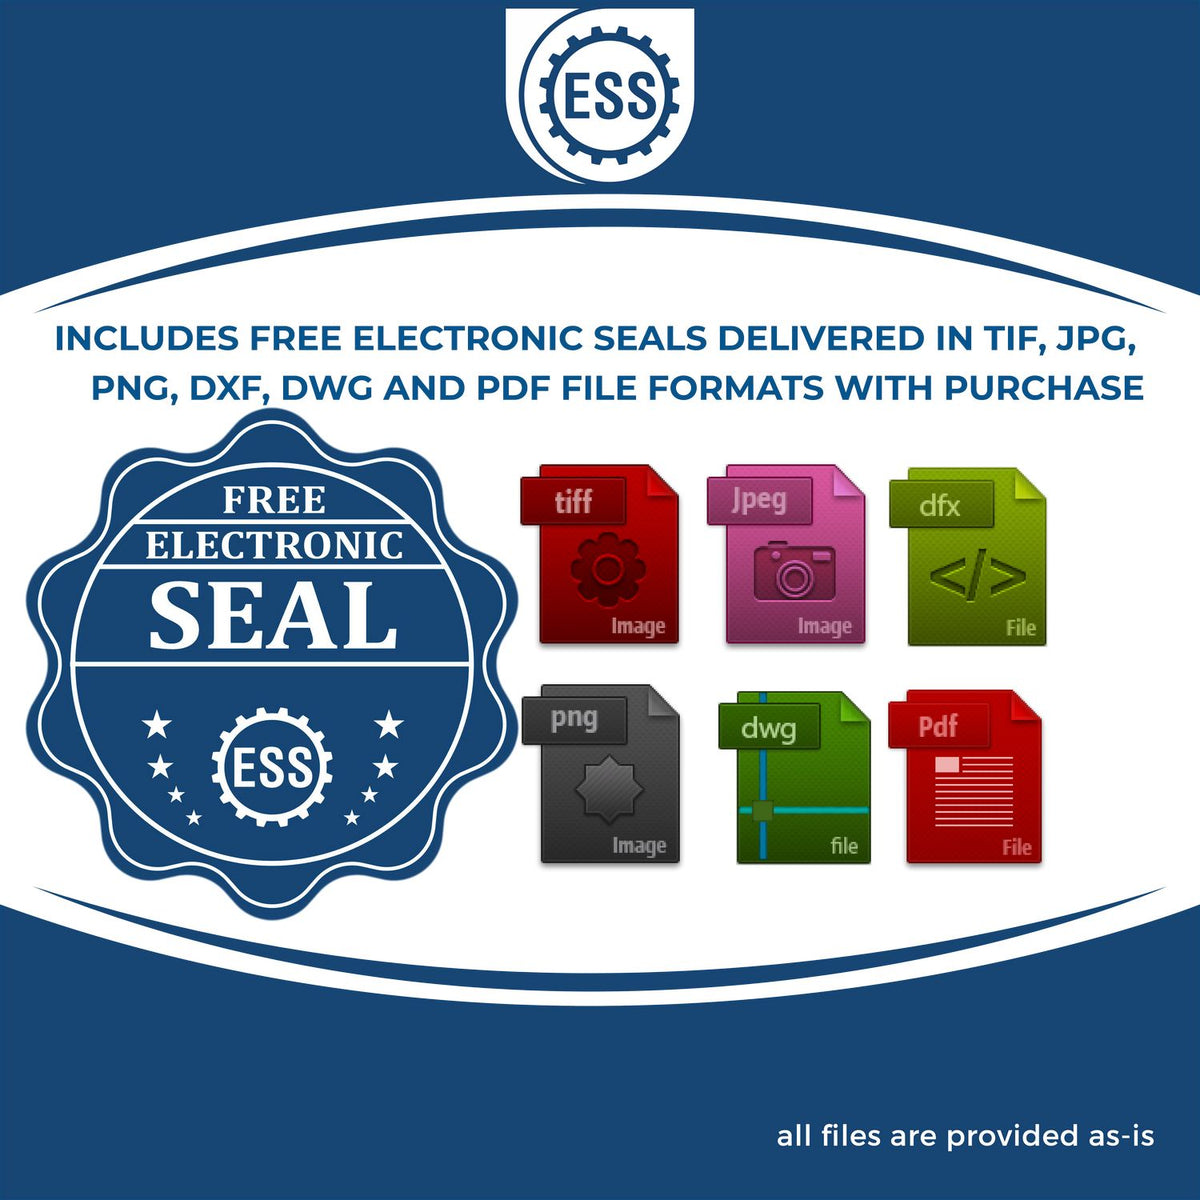 An infographic for the free electronic seal for the Hybrid Kansas Landscape Architect Seal illustrating the different file type icons such as DXF, DWG, TIF, JPG and PNG.